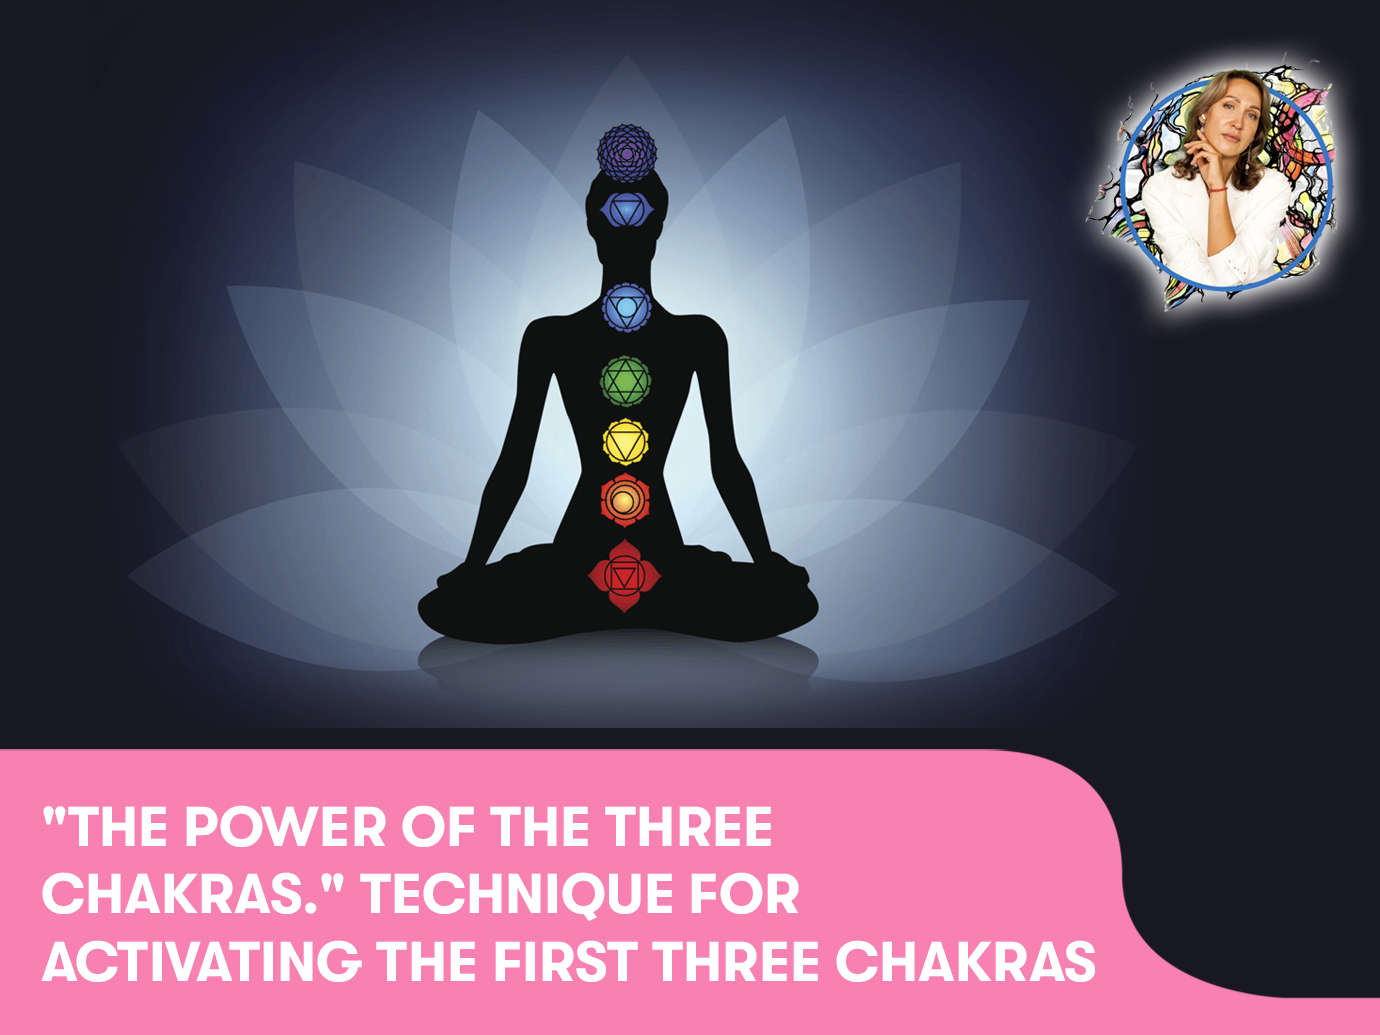 “The power of the three chakras.“ Technique for activating the first three chakras